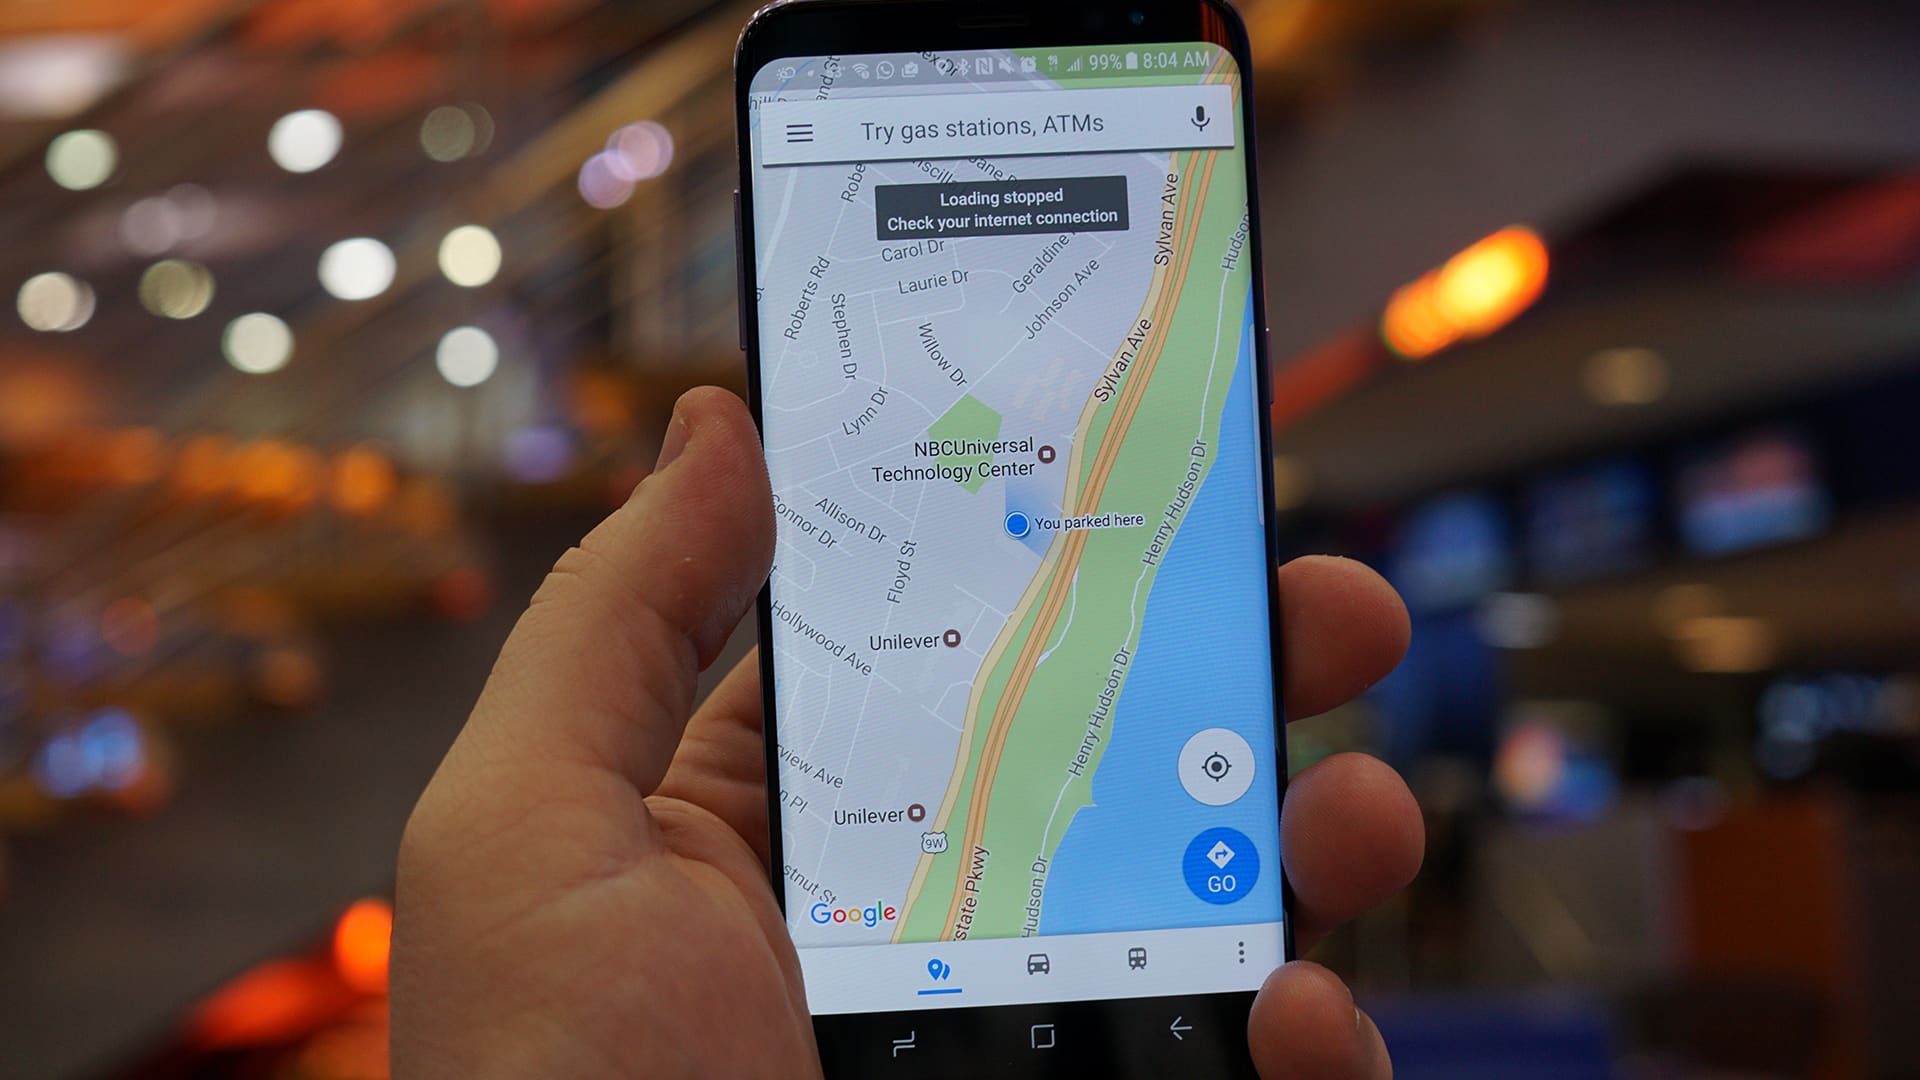 How To Find Your Parked Car With Google Maps